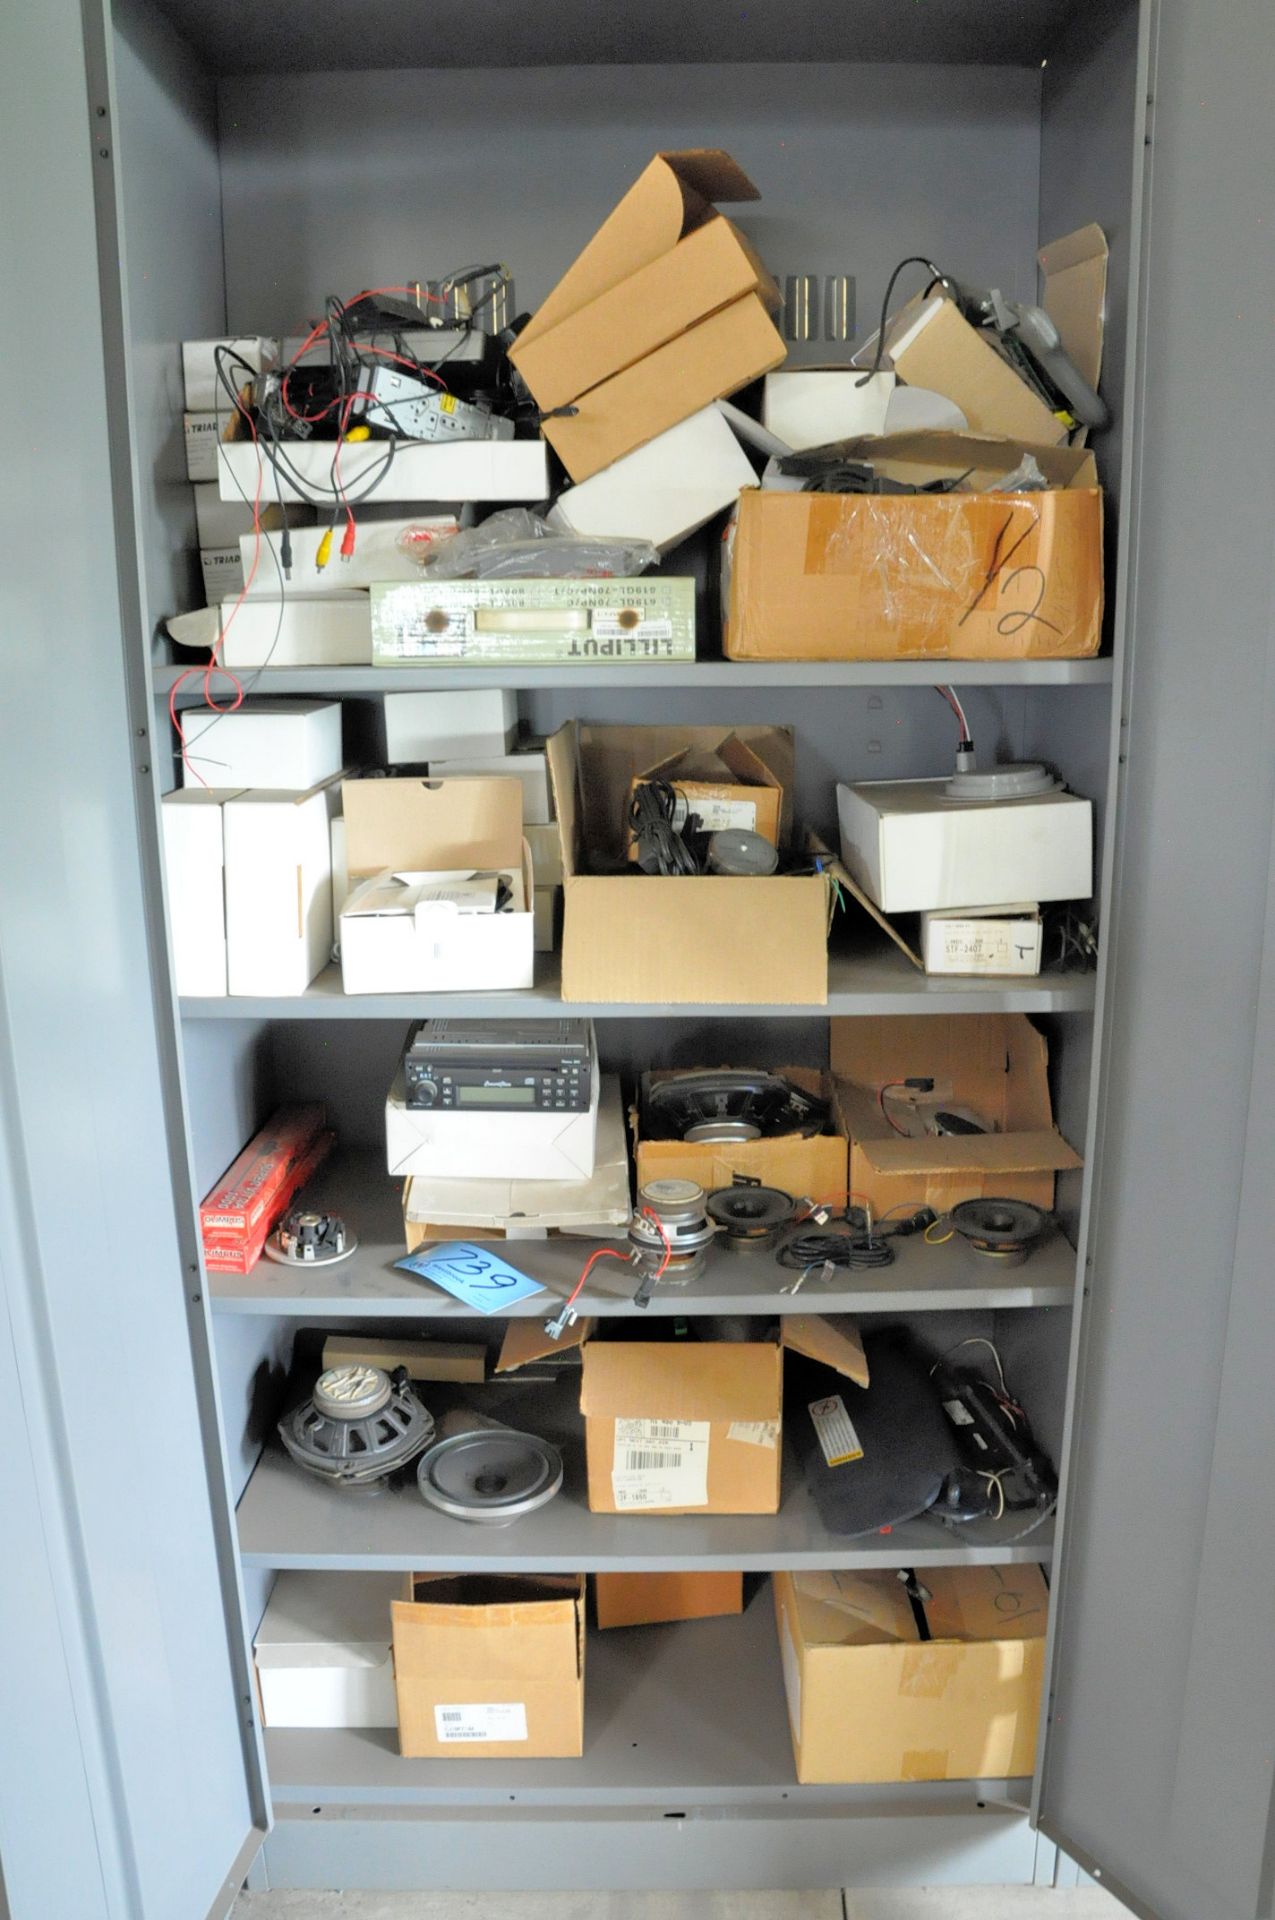 Lot-(4) Cabinets and (1) Shelving Unit with Various Electrical Components Contents - Image 4 of 7